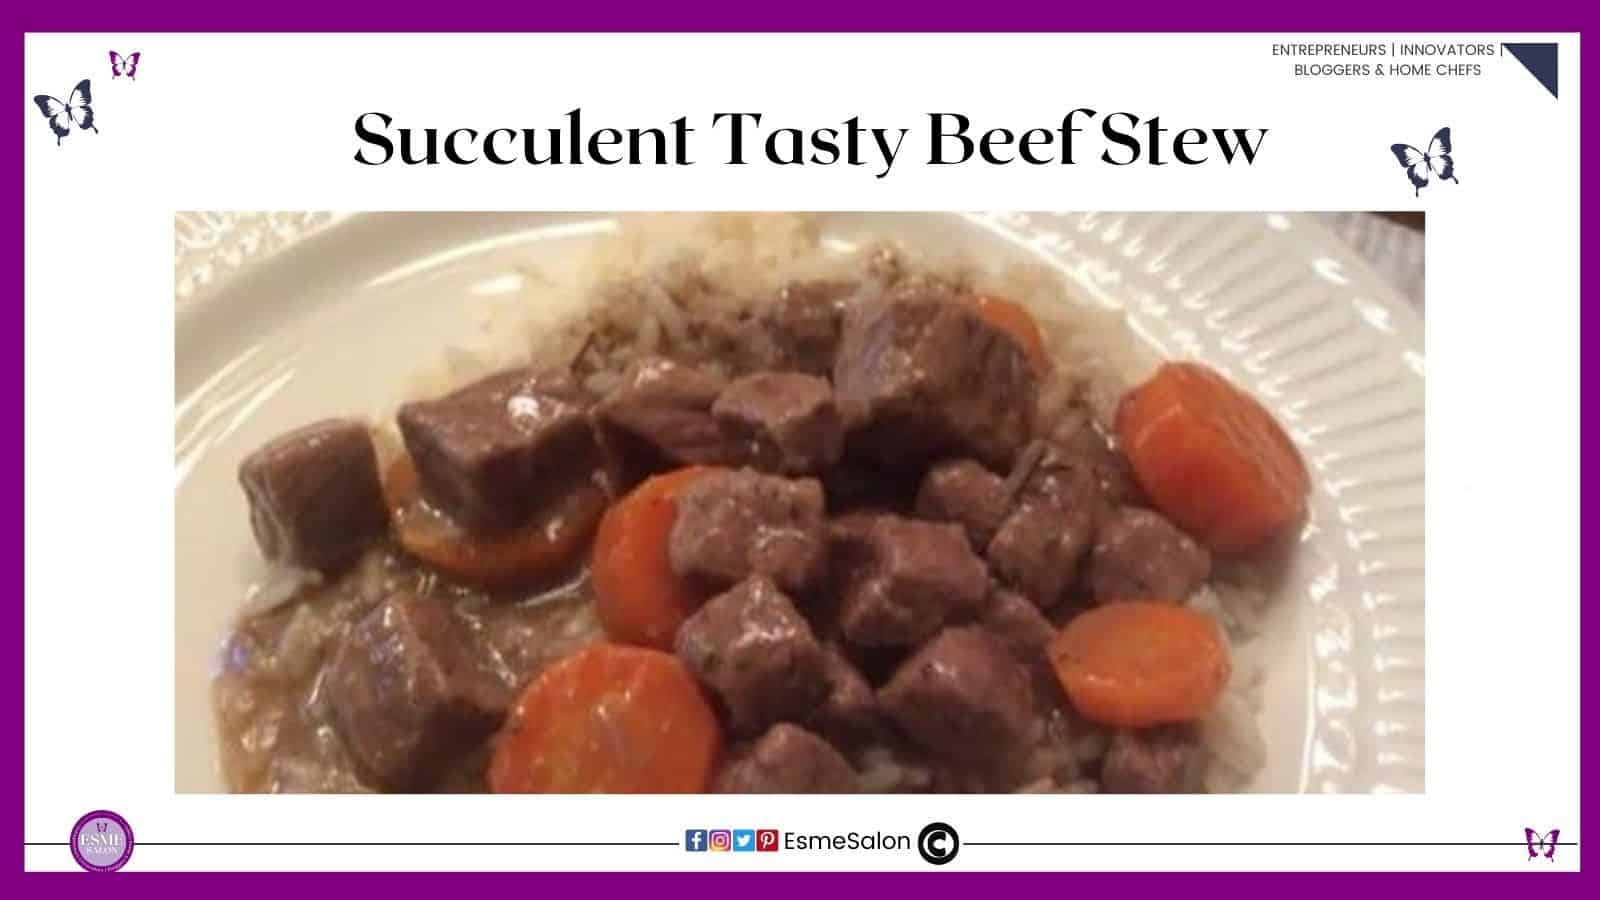 an image of a plate ready for dinner with white rice, carrot slices and Succulent Tasty Beef Stew